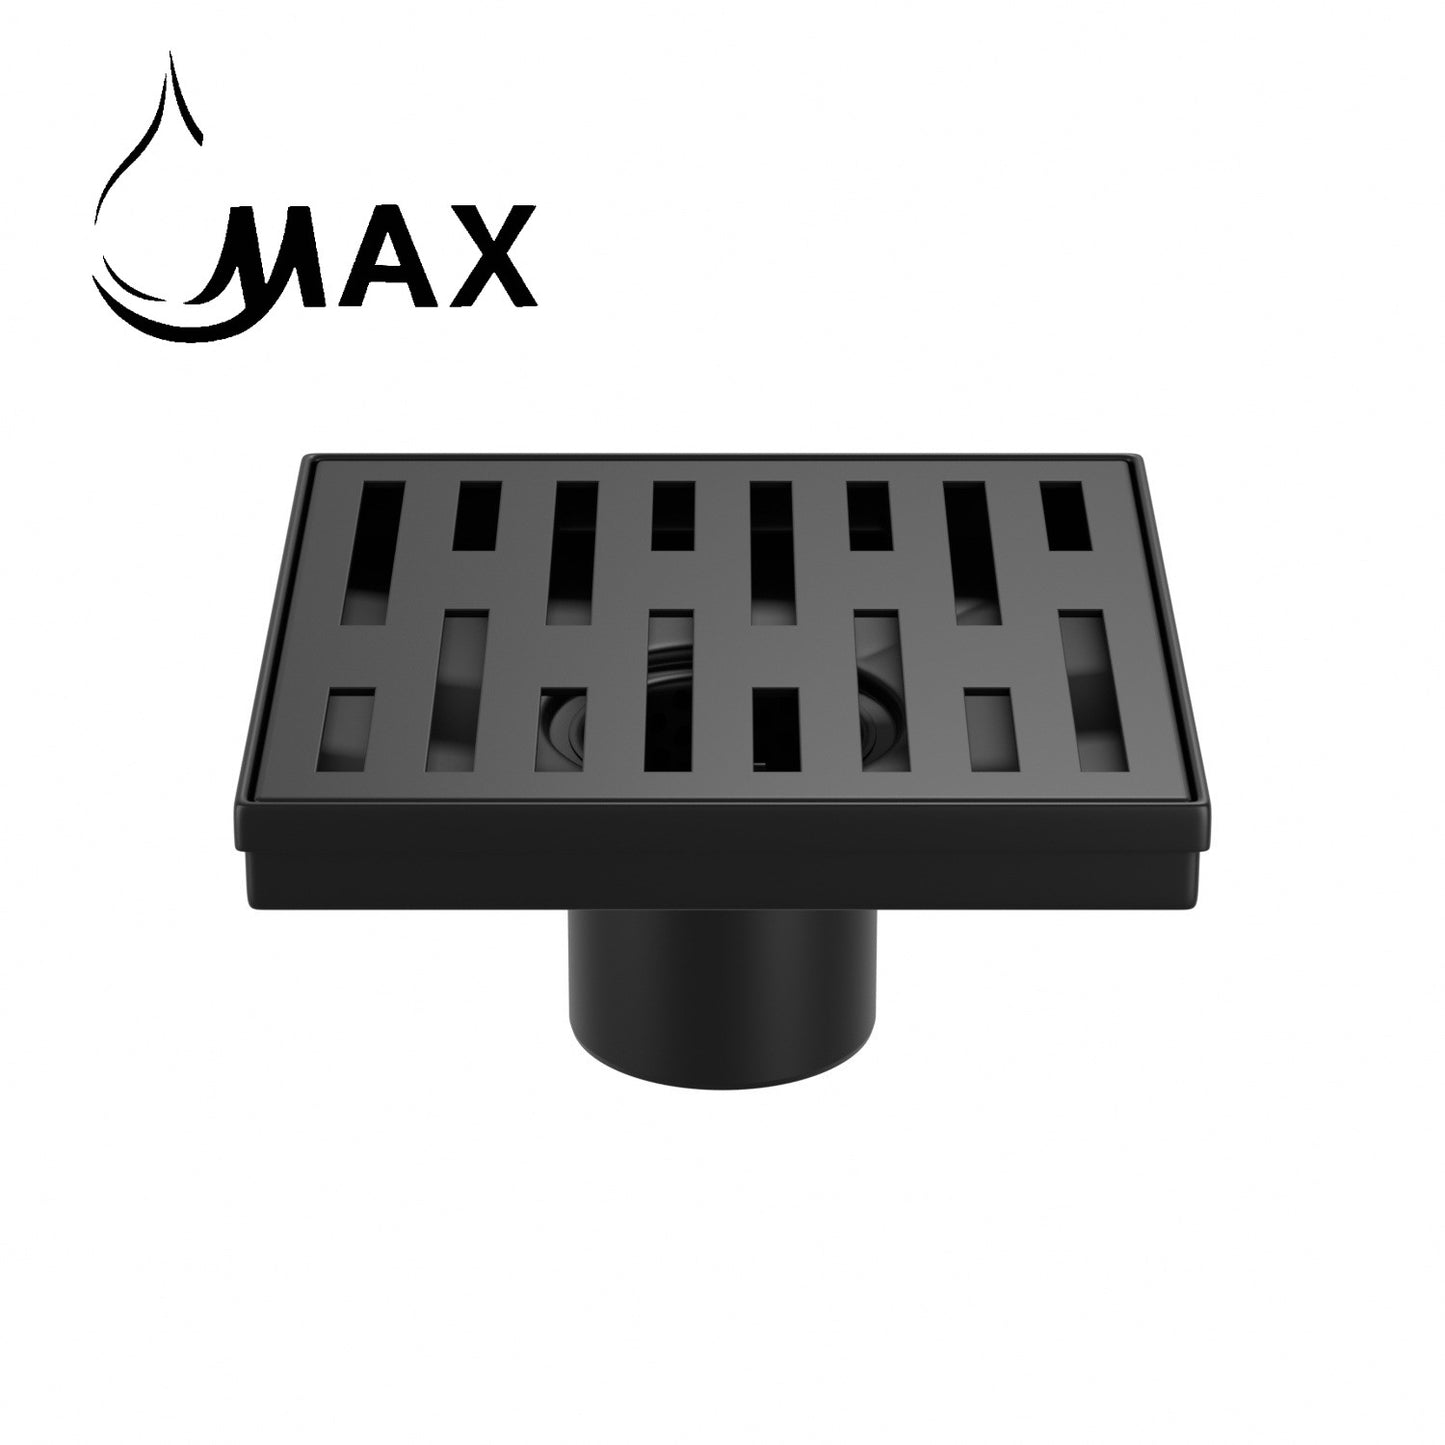 Square Shower Drain with Cover 6 Inches Matte Black